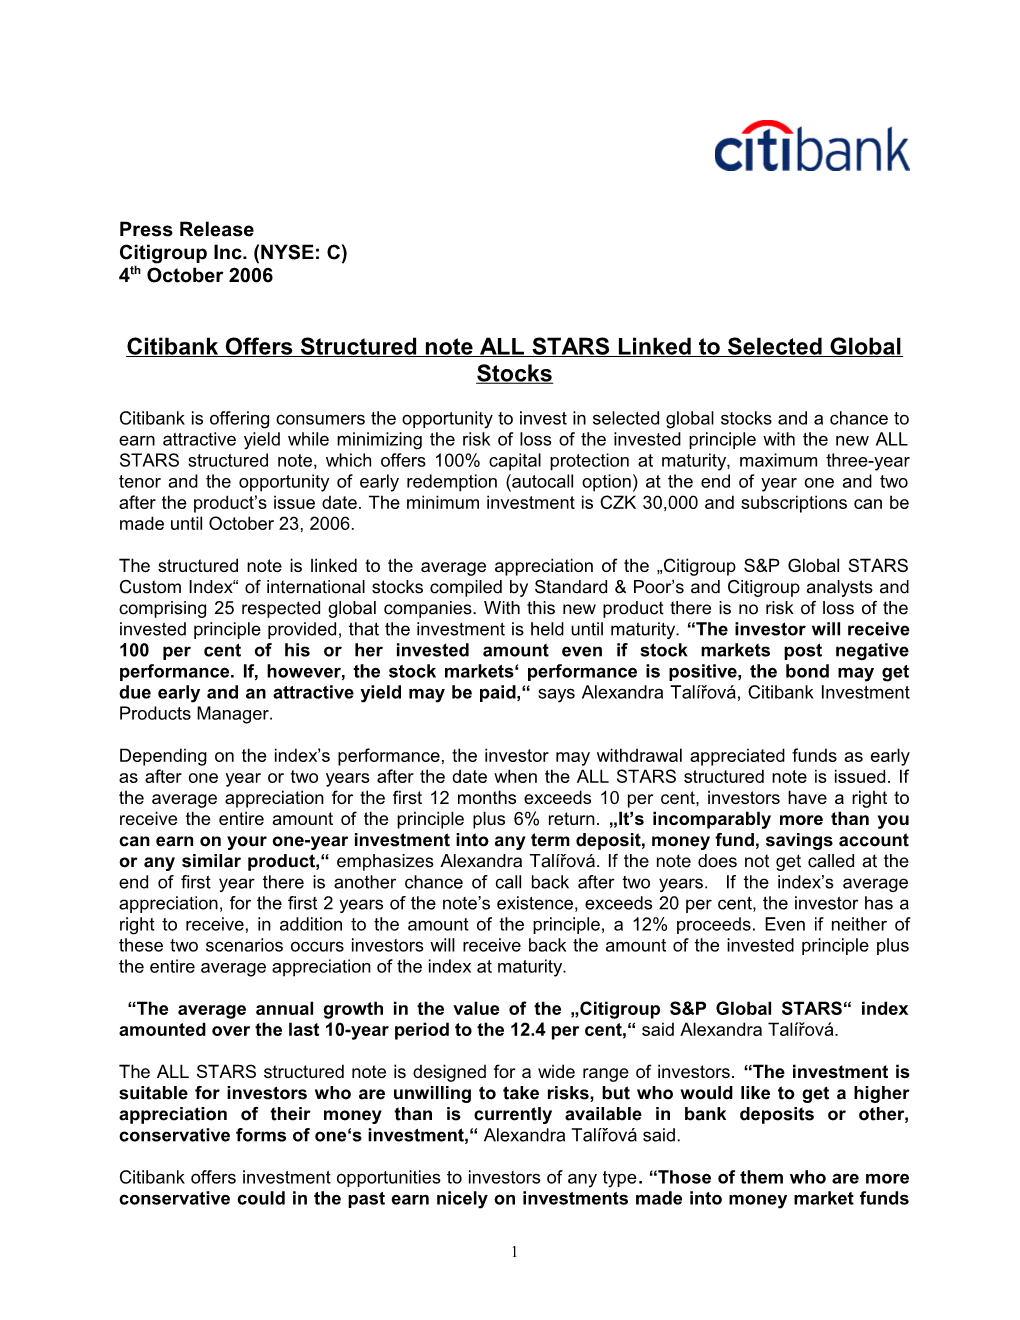 Citibank Offers Structured Note ALL STARS Linked to Selected Global Stocks